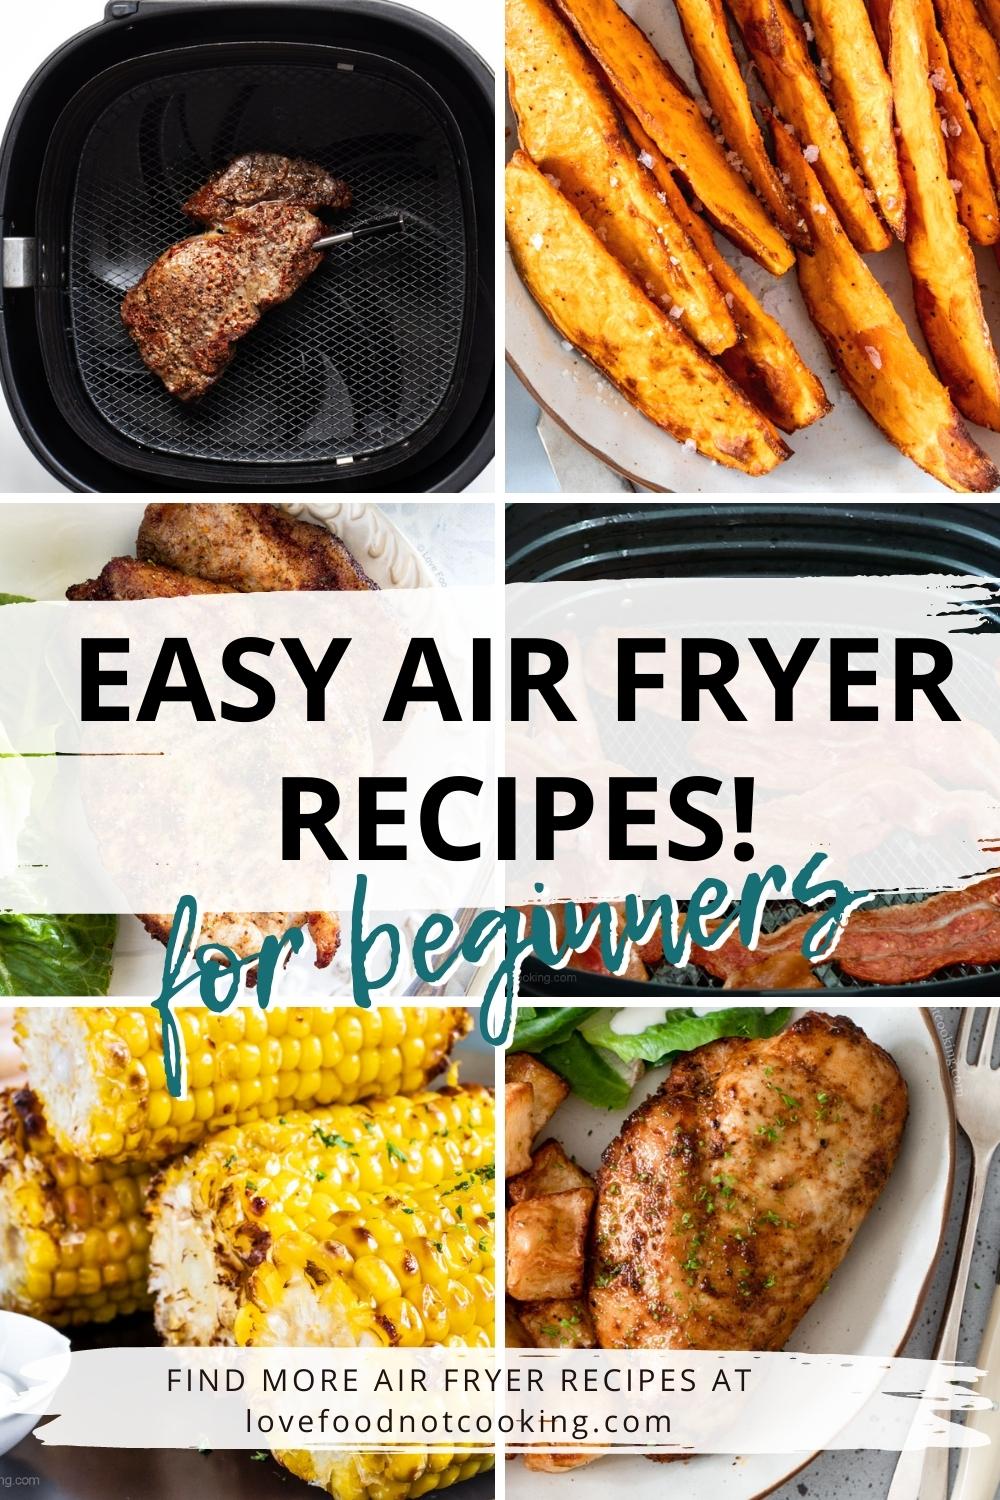 A pinterest image photo grid with text overlay: easy air fryer recipes! for beginners.